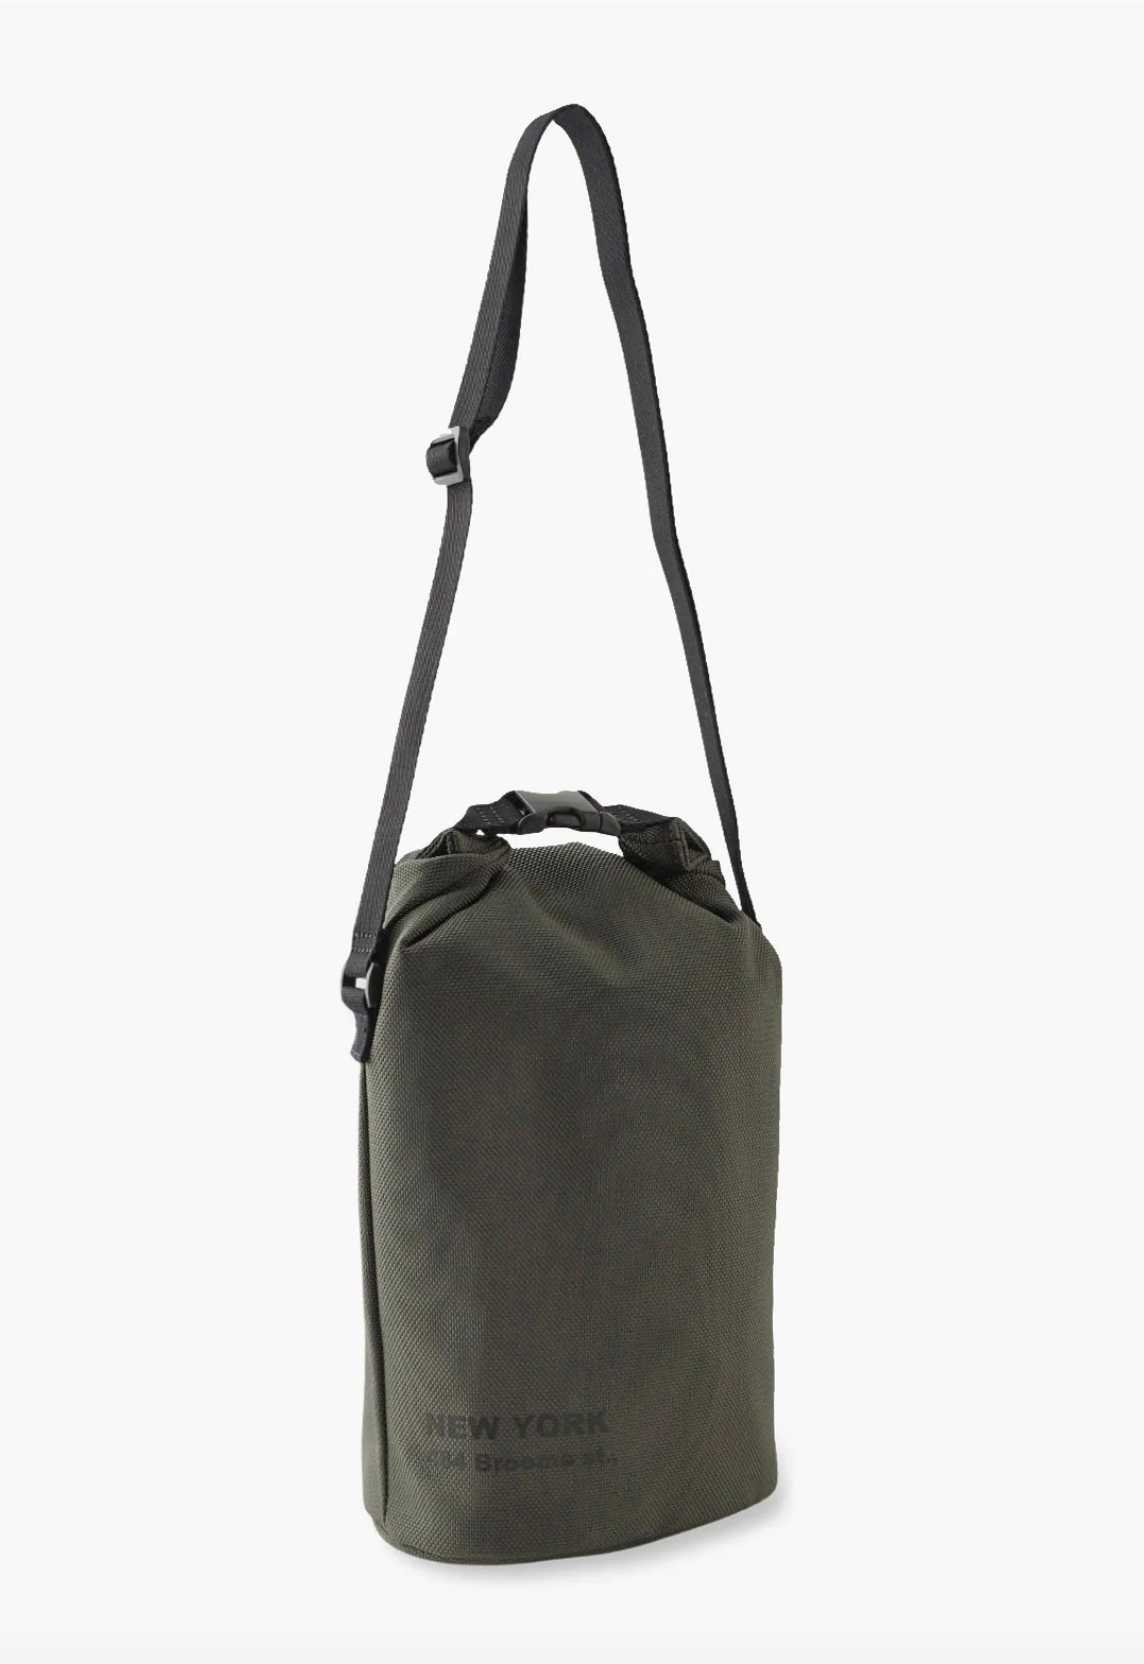 Bucket Bag military green, on back “NY 484 Broome sf.” Green fonts, black buckle, large hems